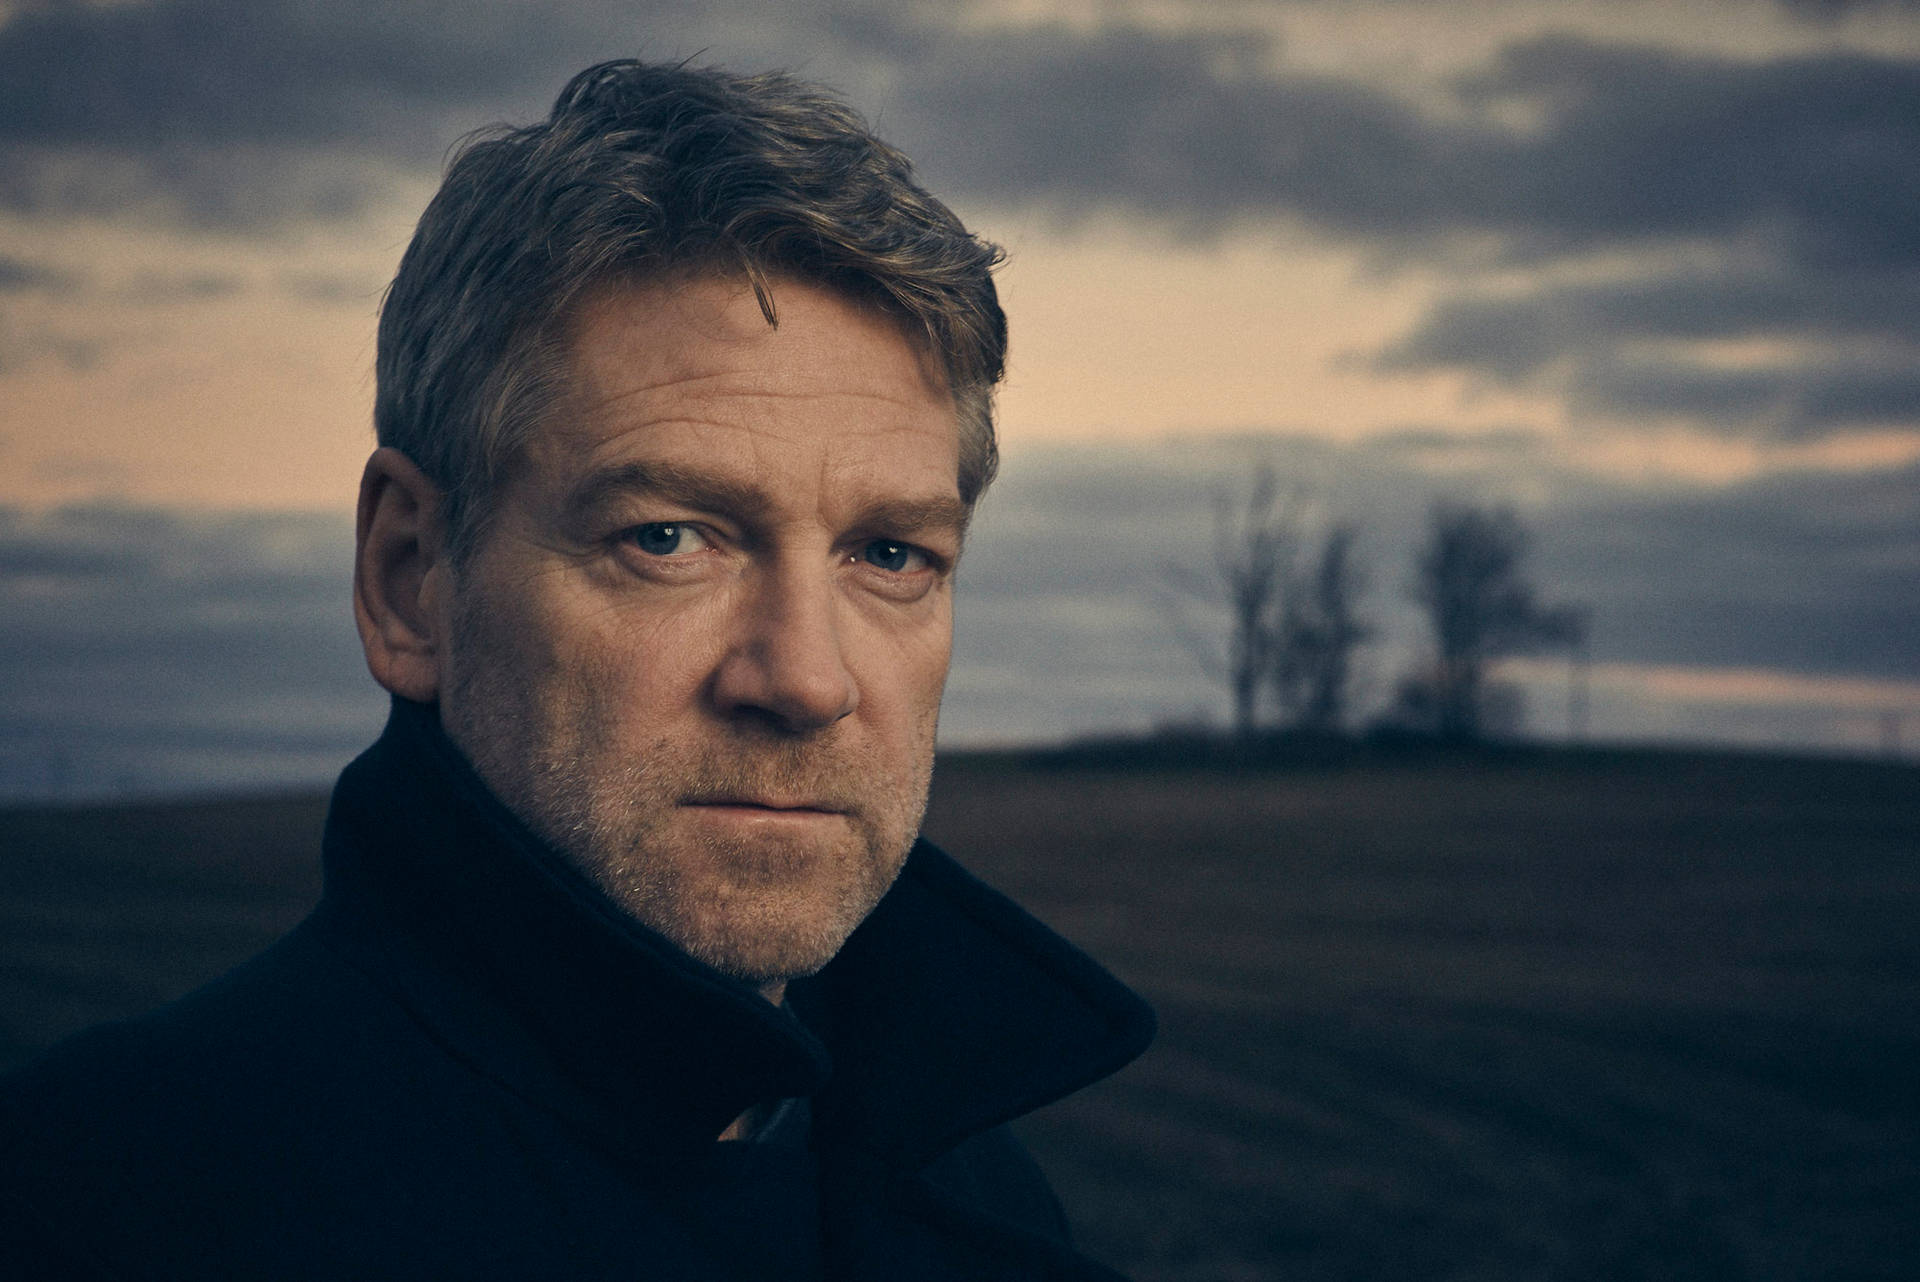 Mysterious Kenneth Branagh Wallpaper